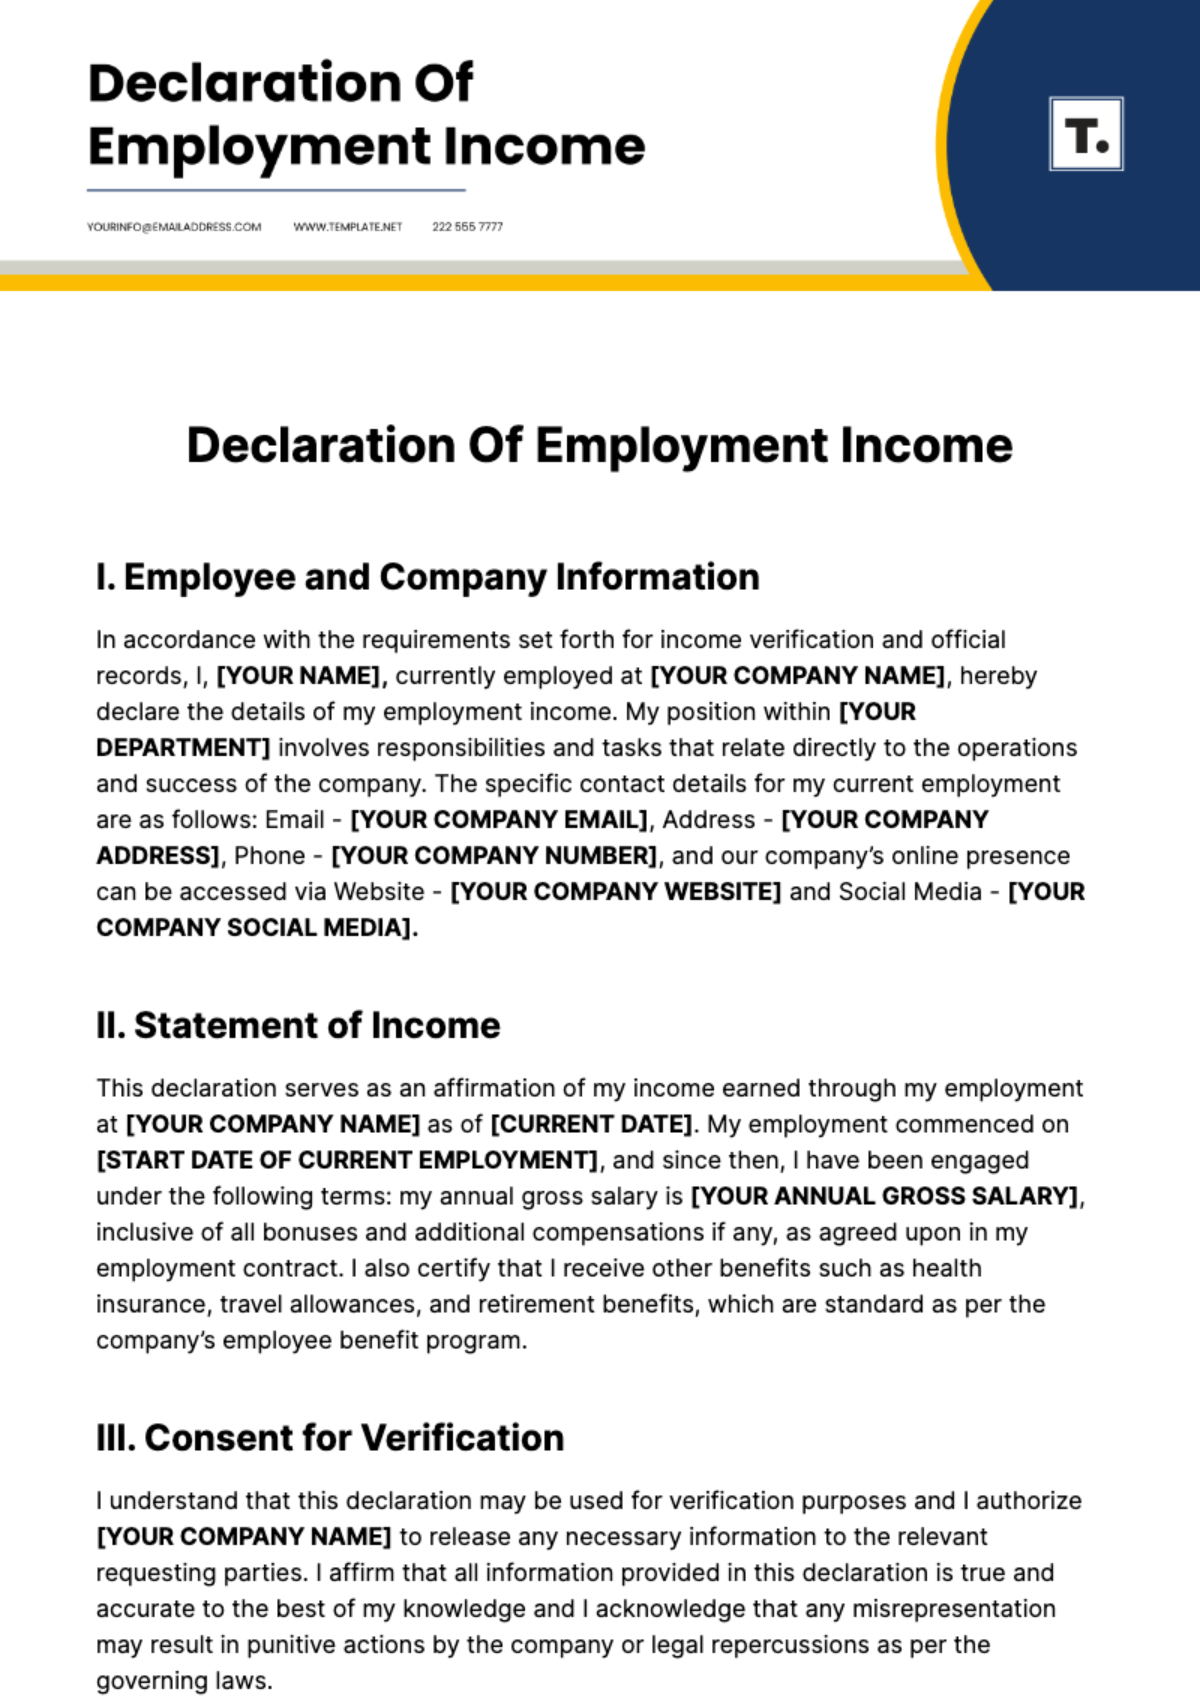 Declaration Of Employment Income Template